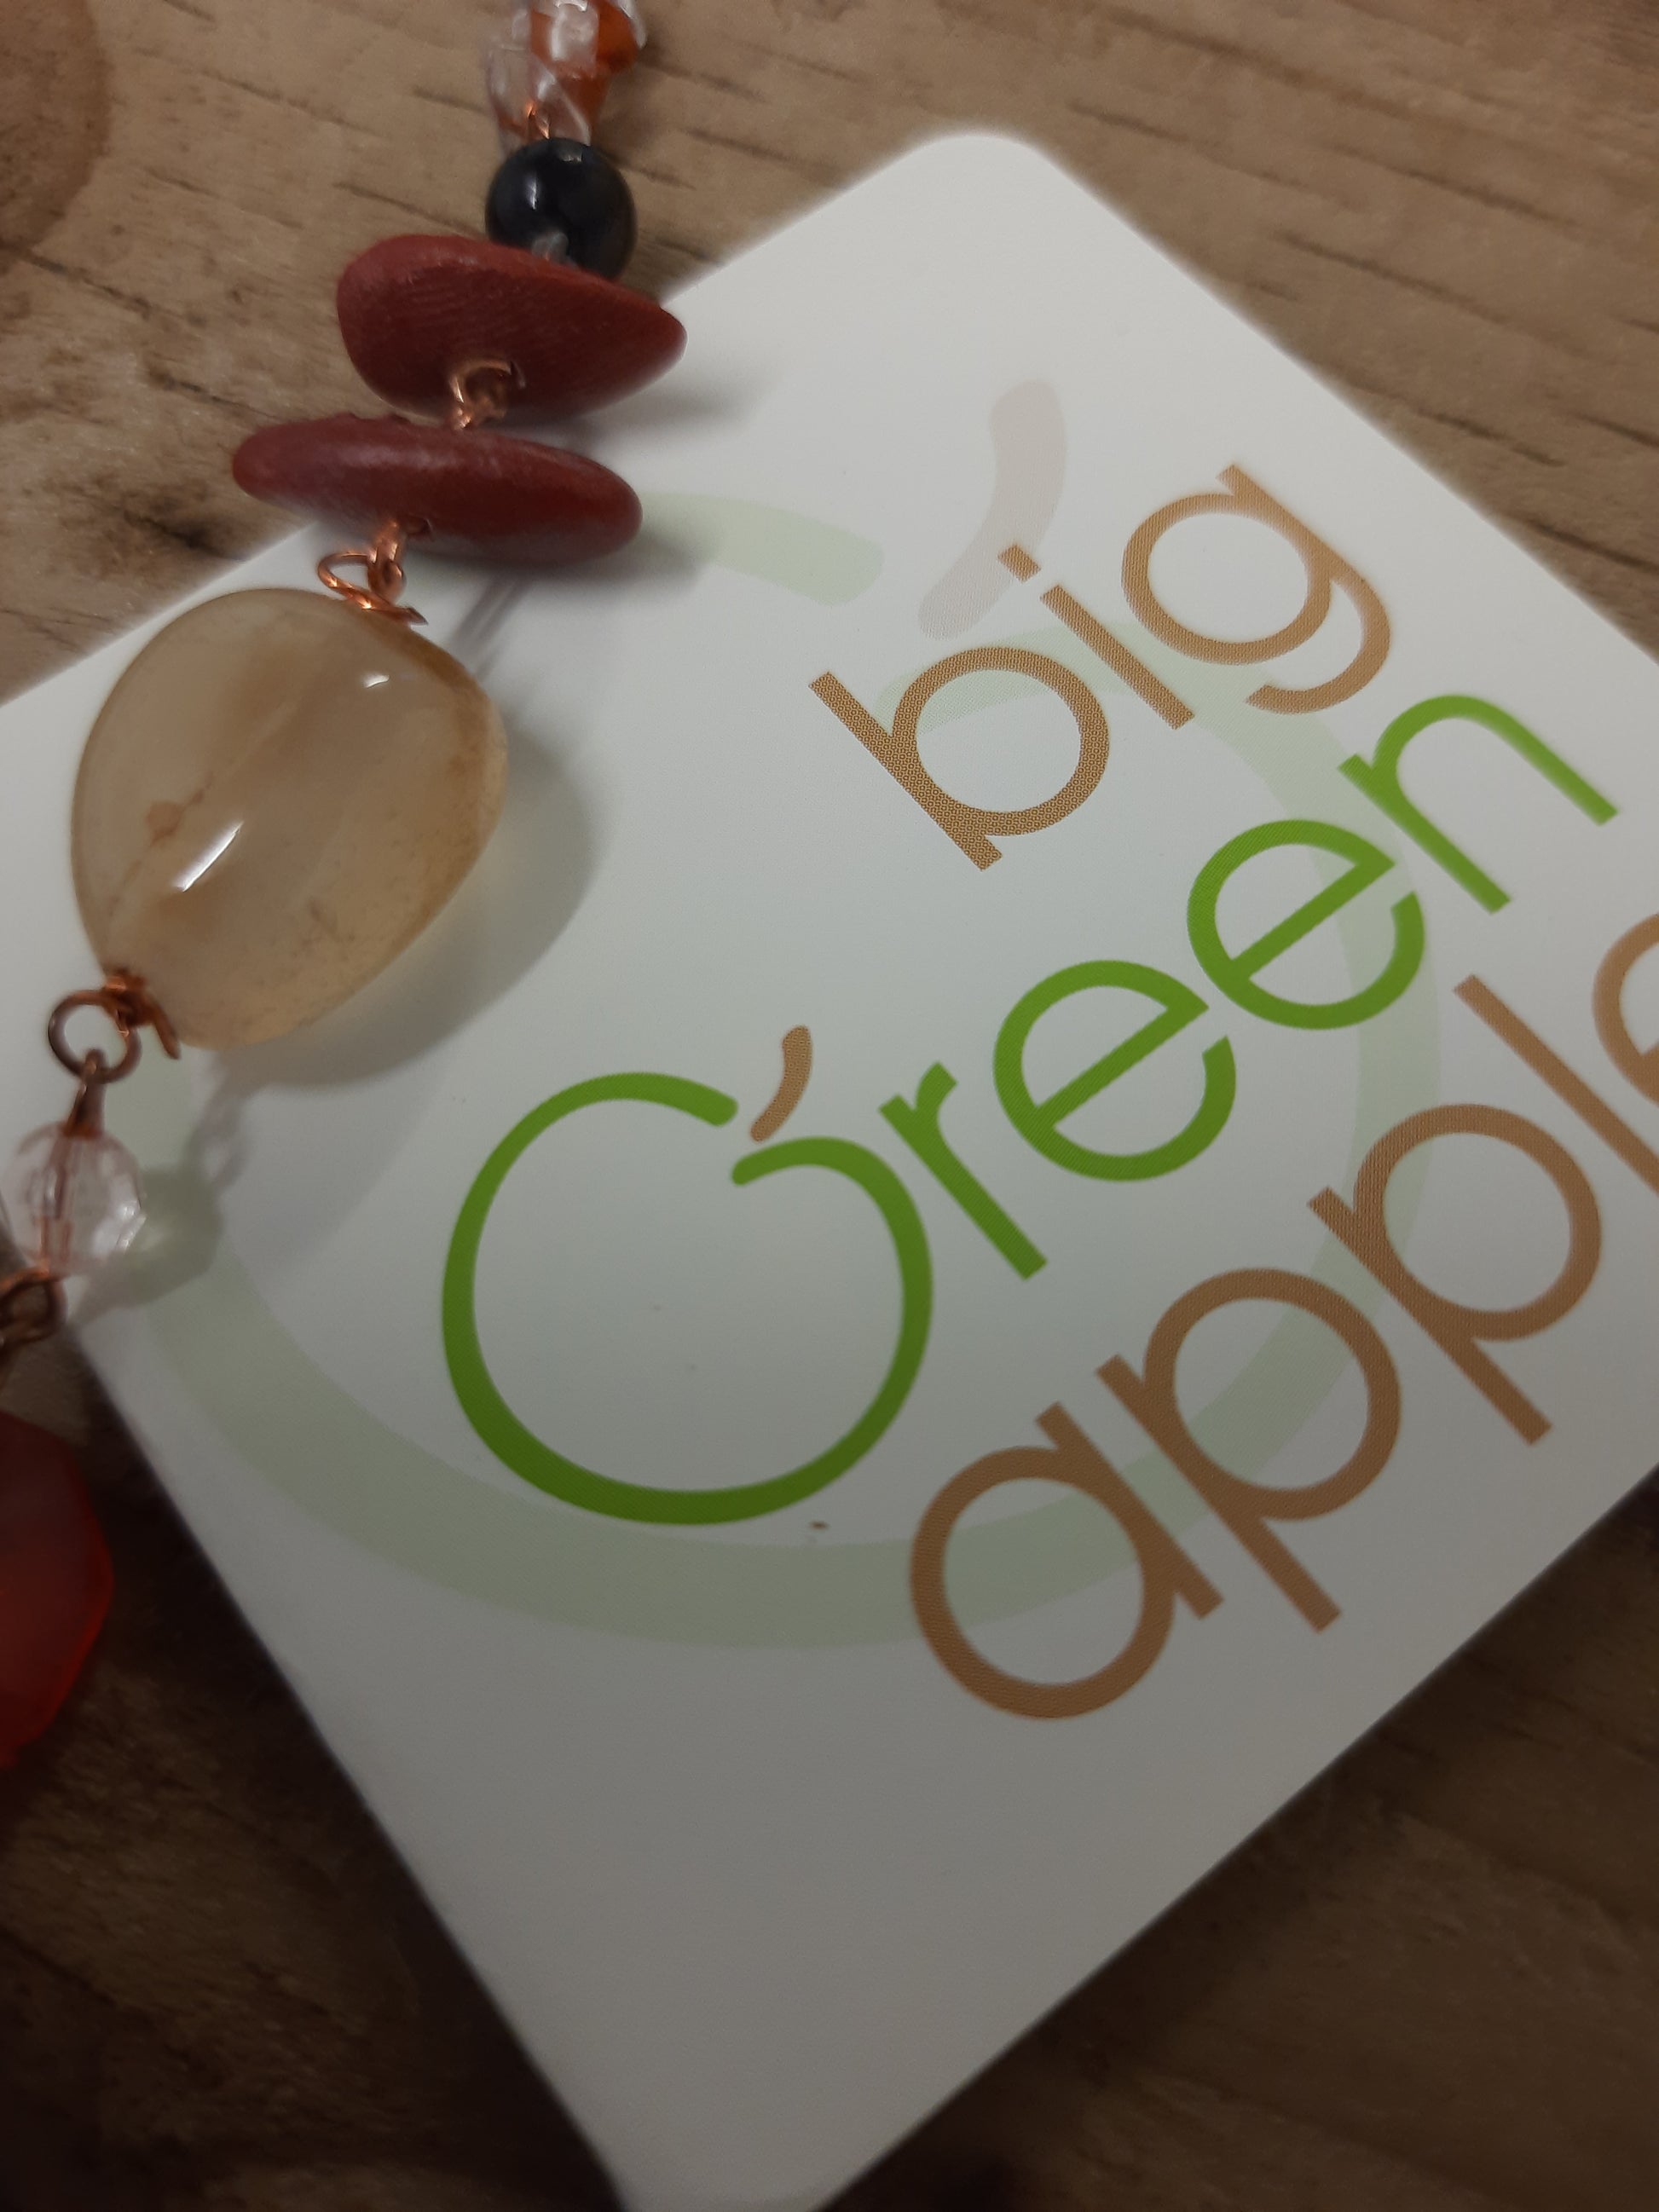 Necklace, Eco Friendly Shop, Ethical Shopping, Jewellery Fair, Anniversary Gifts, BIG GREEN APPLE